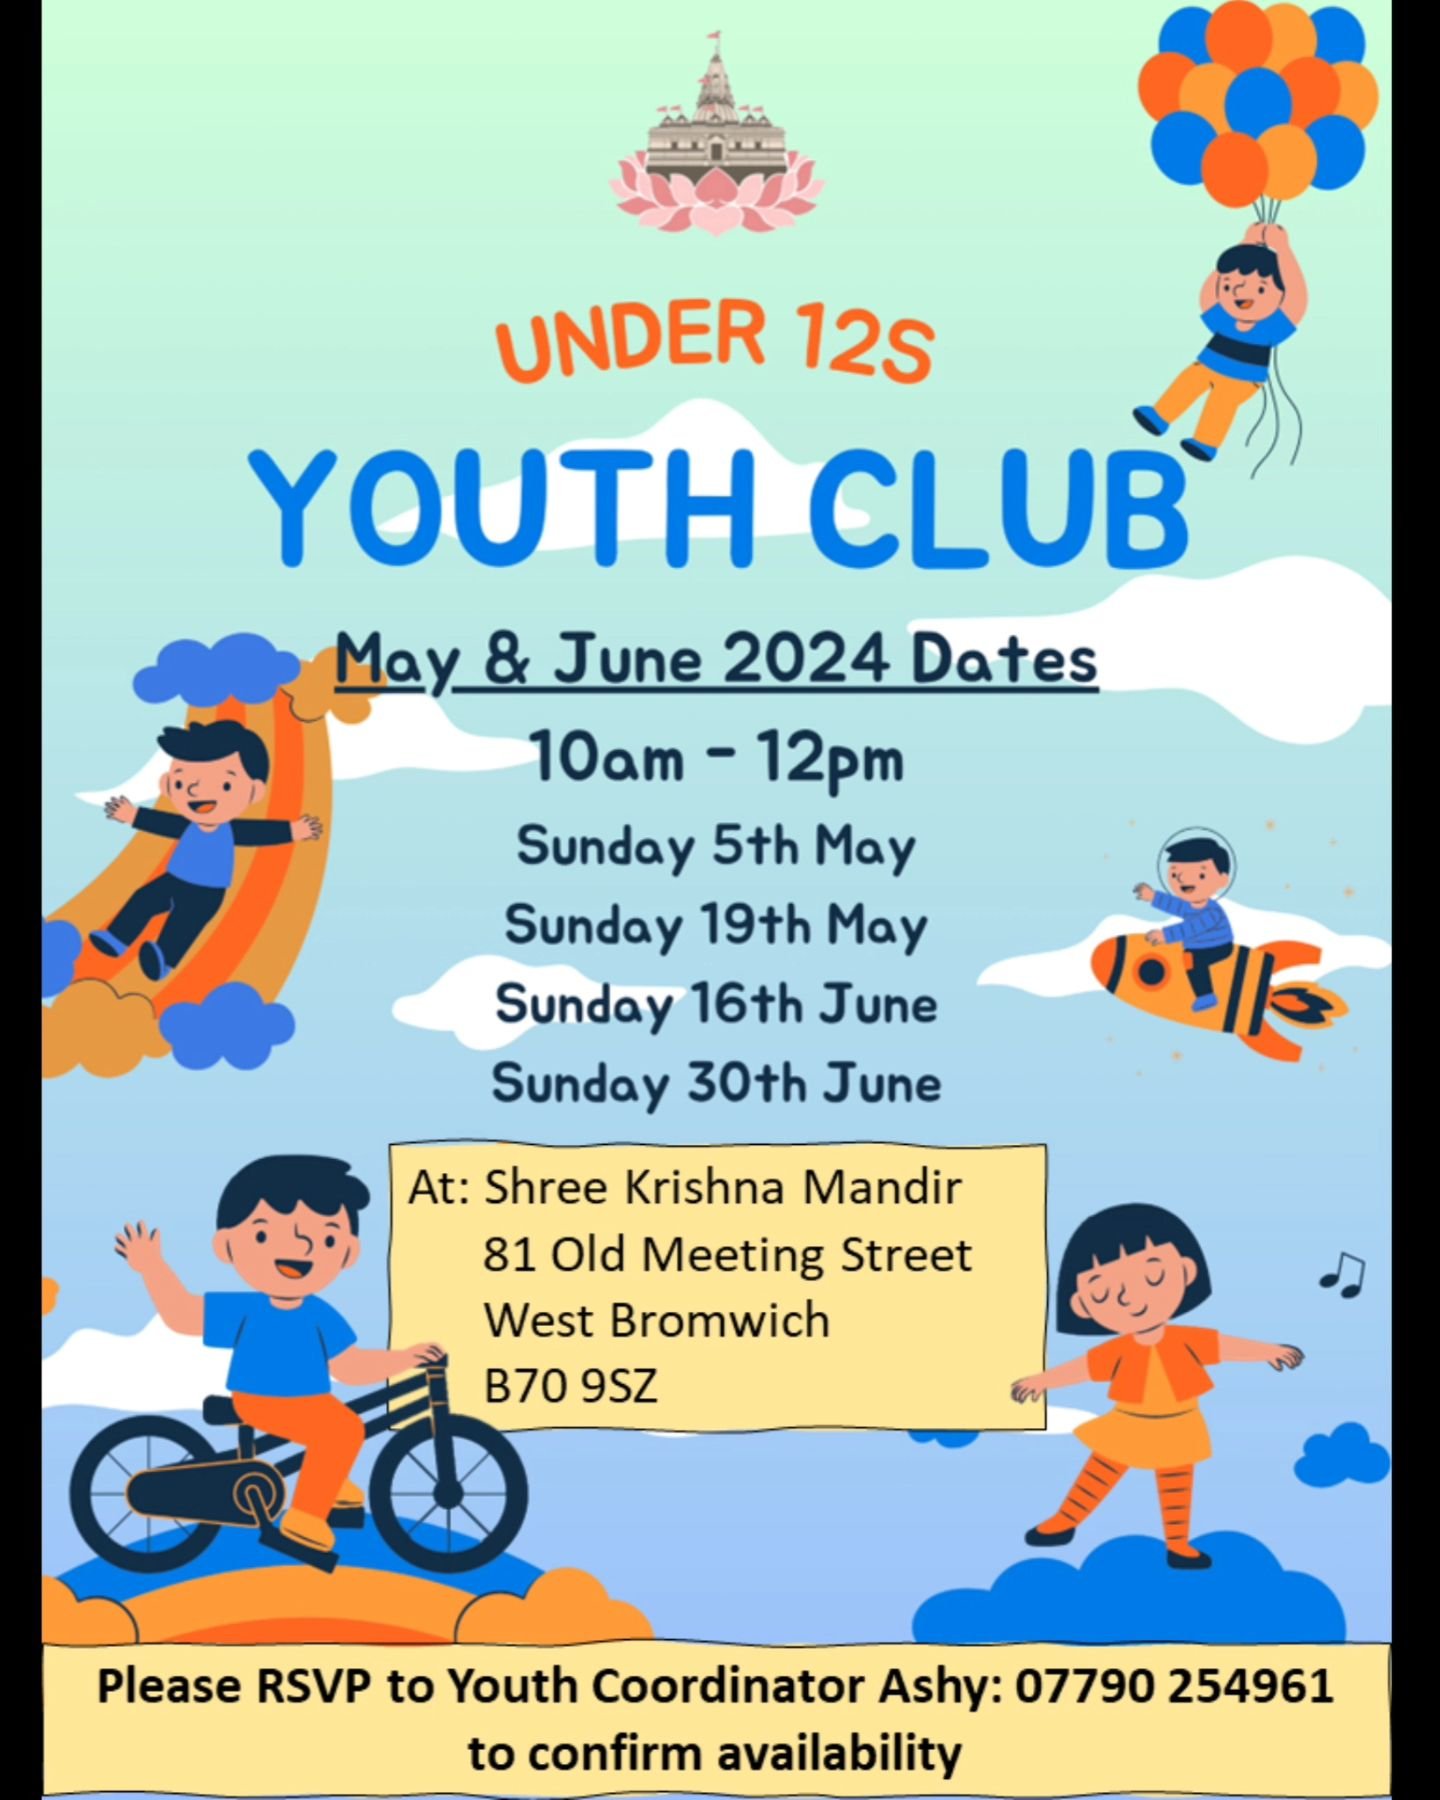 Jai Shree Krishna 

Shree Krishna Mandir is pleased to announce the&nbsp;Youth&nbsp;Club dates for May and June 2024.&nbsp;Youth&nbsp;Club will take place between 10am to midday. Please RSVP to reserve your place.

Snacks and soft drinks will be avai